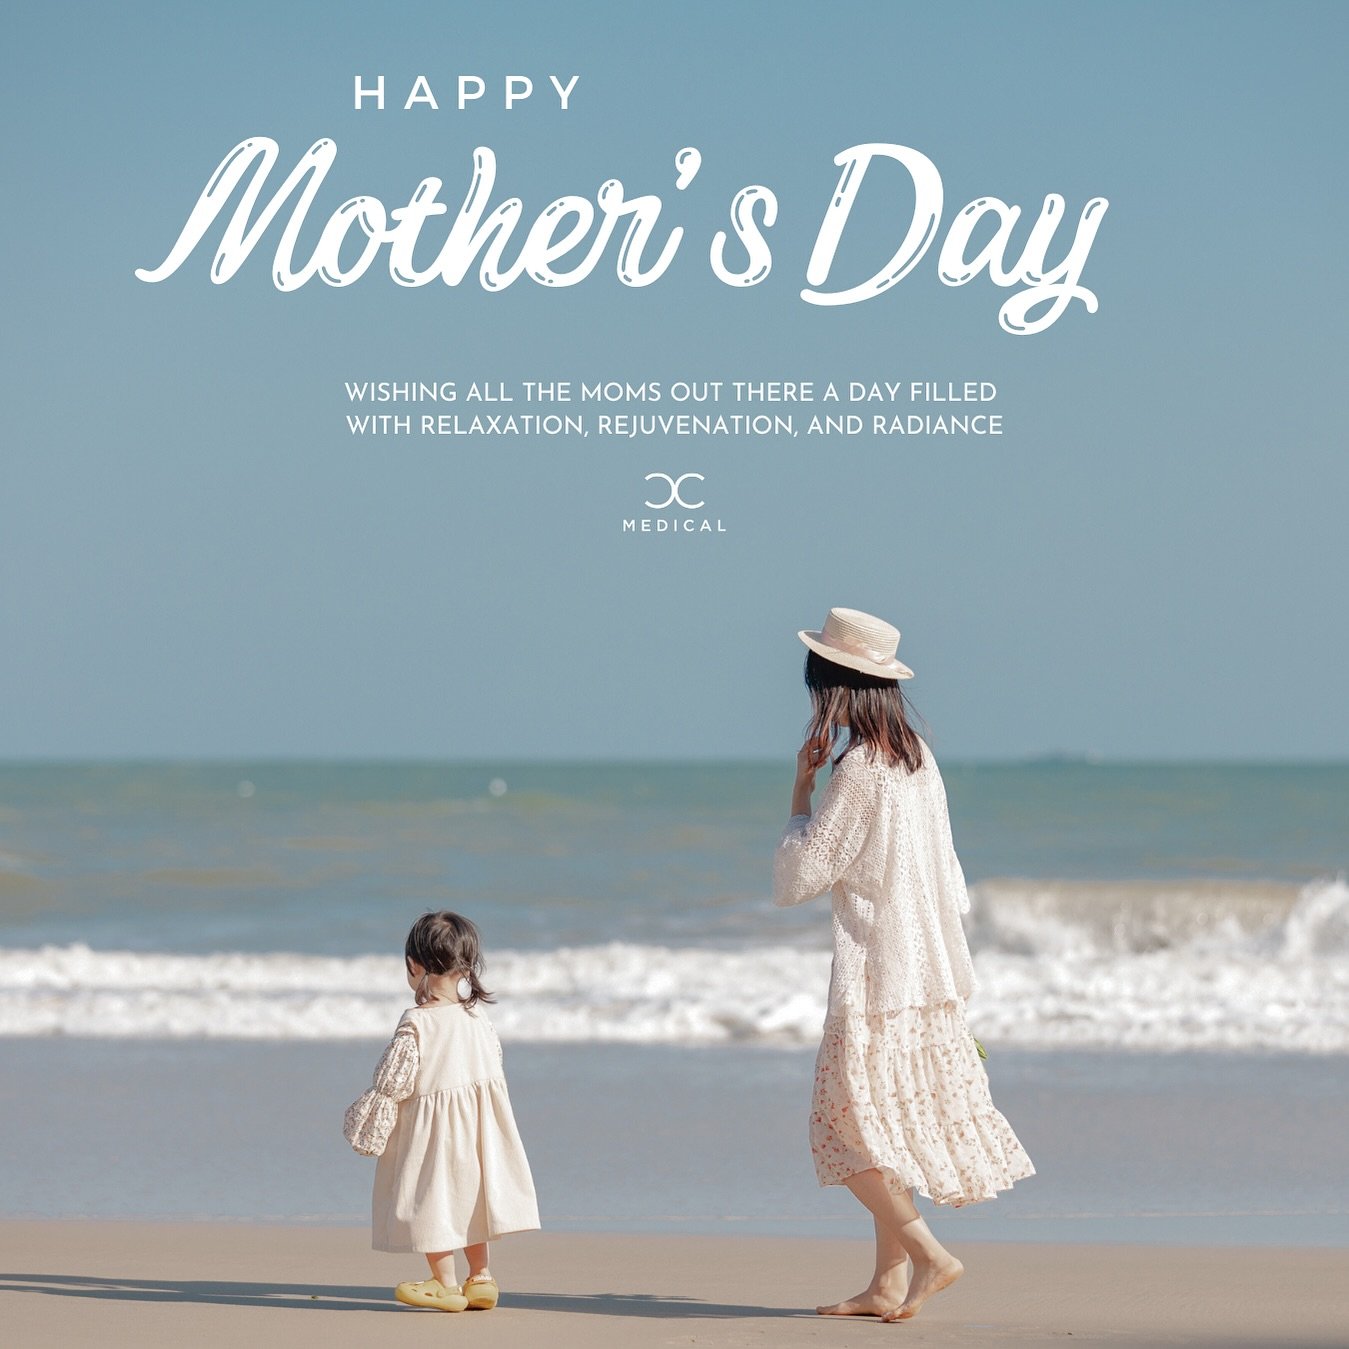 Because every mom deserves a day of relaxation and rejuvenation. Happy Mother&rsquo;s Day from CC Medical! 🤍✨